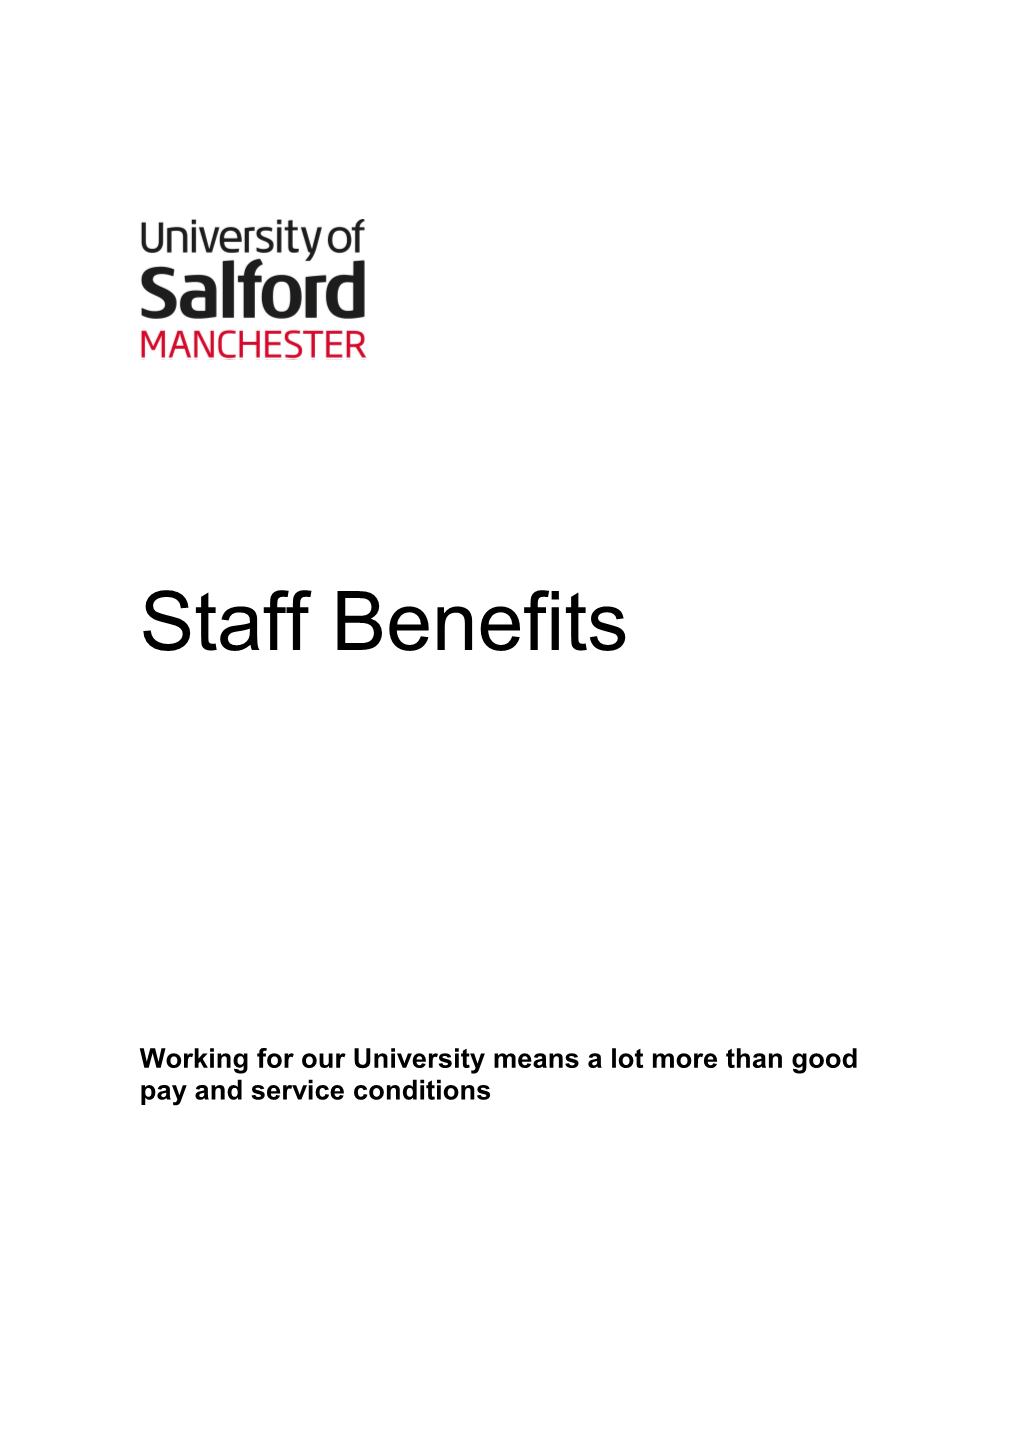 Benefits of Working at the University of Salford